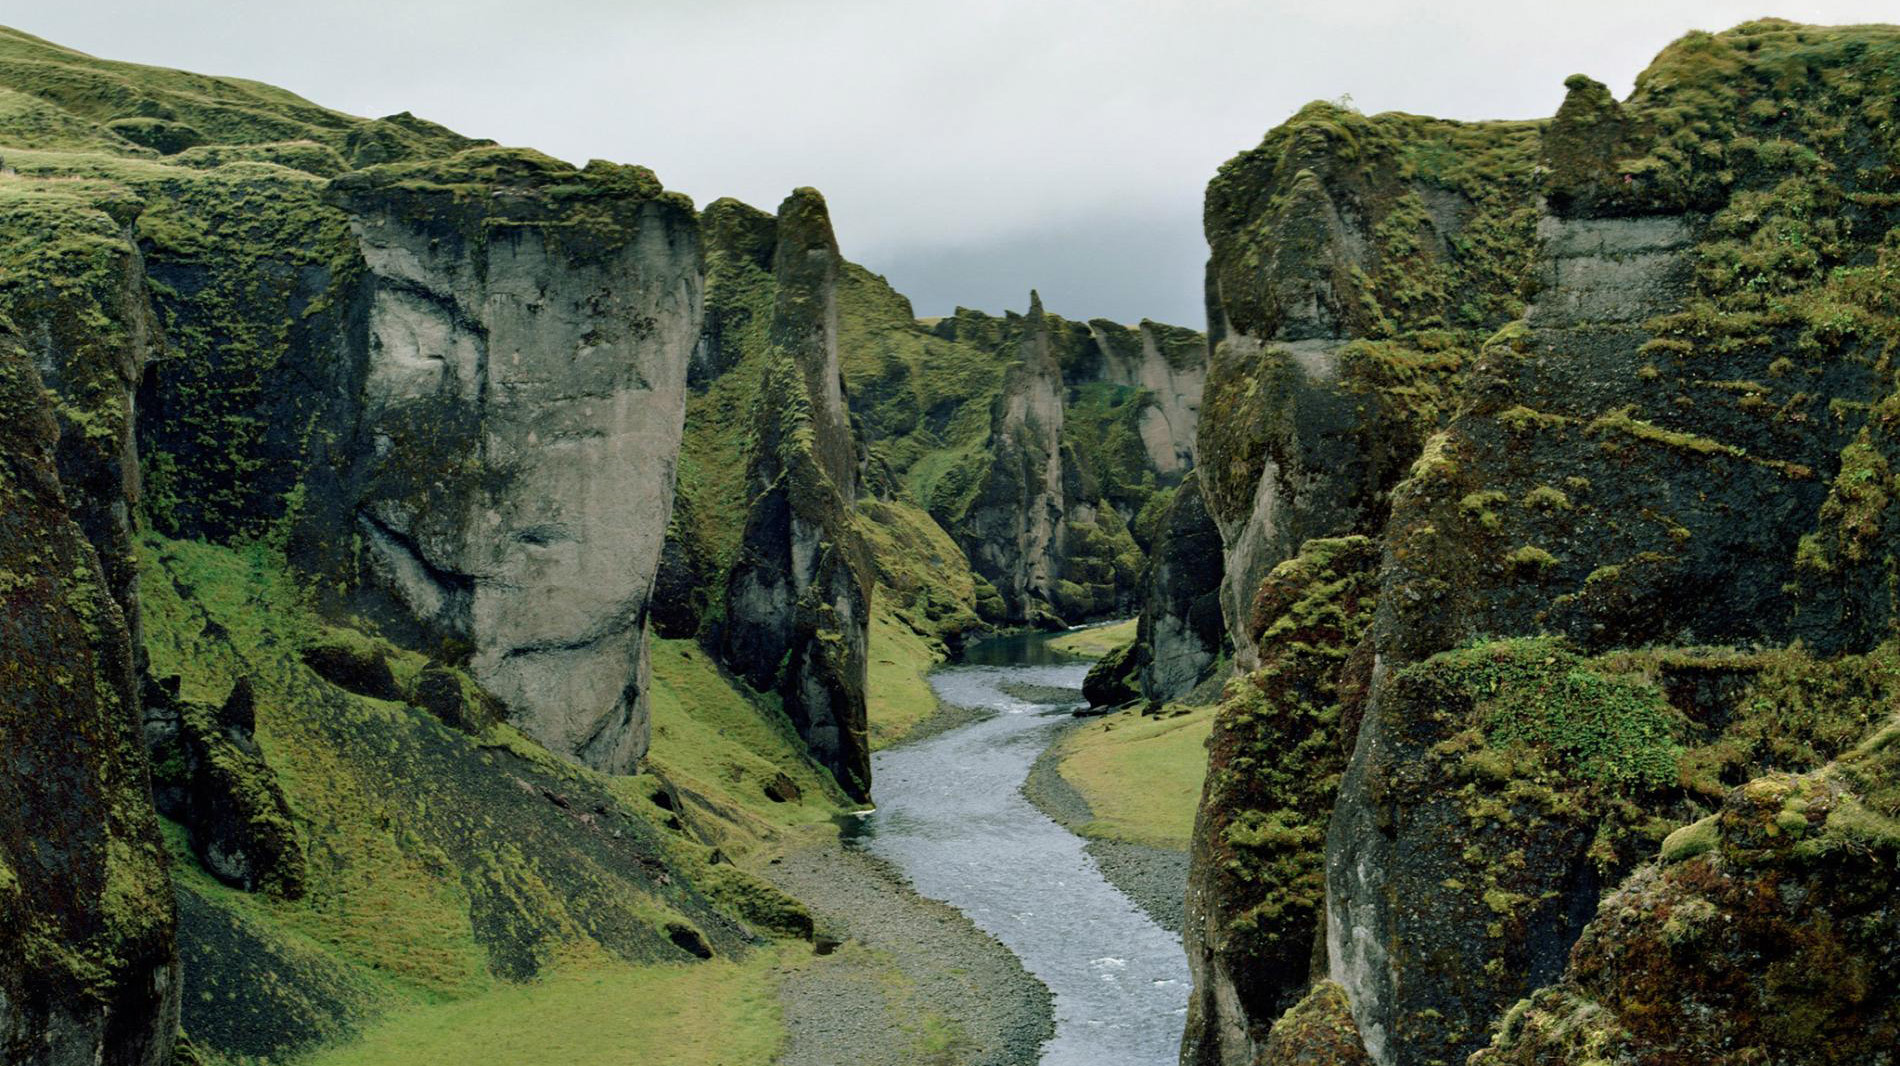 The massive, sheer walls of Fjaðrárgljúfur Canyon are believed to have formed around 10,000 years ago at the end of the last Ice Age. Tread a walking path by the canyon’s edge, or if you're feeling daring, hike inside the canyon—wading through the Fjaðrá River’s chilly waters while enjoying the majestic view.